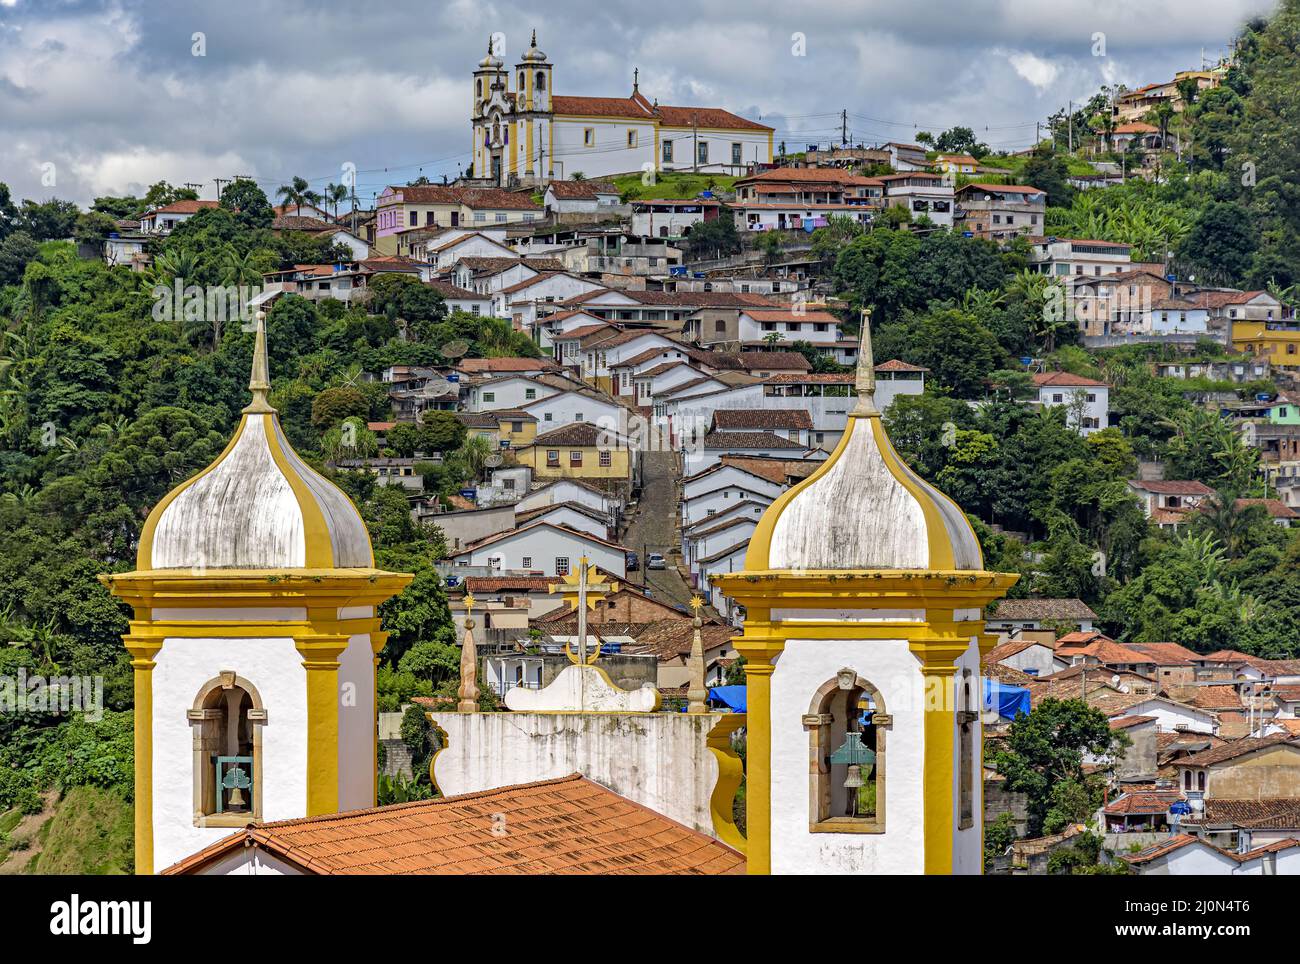 Ouro Preto city with its slopes, hills and churches seen through the old church towers Stock Photo